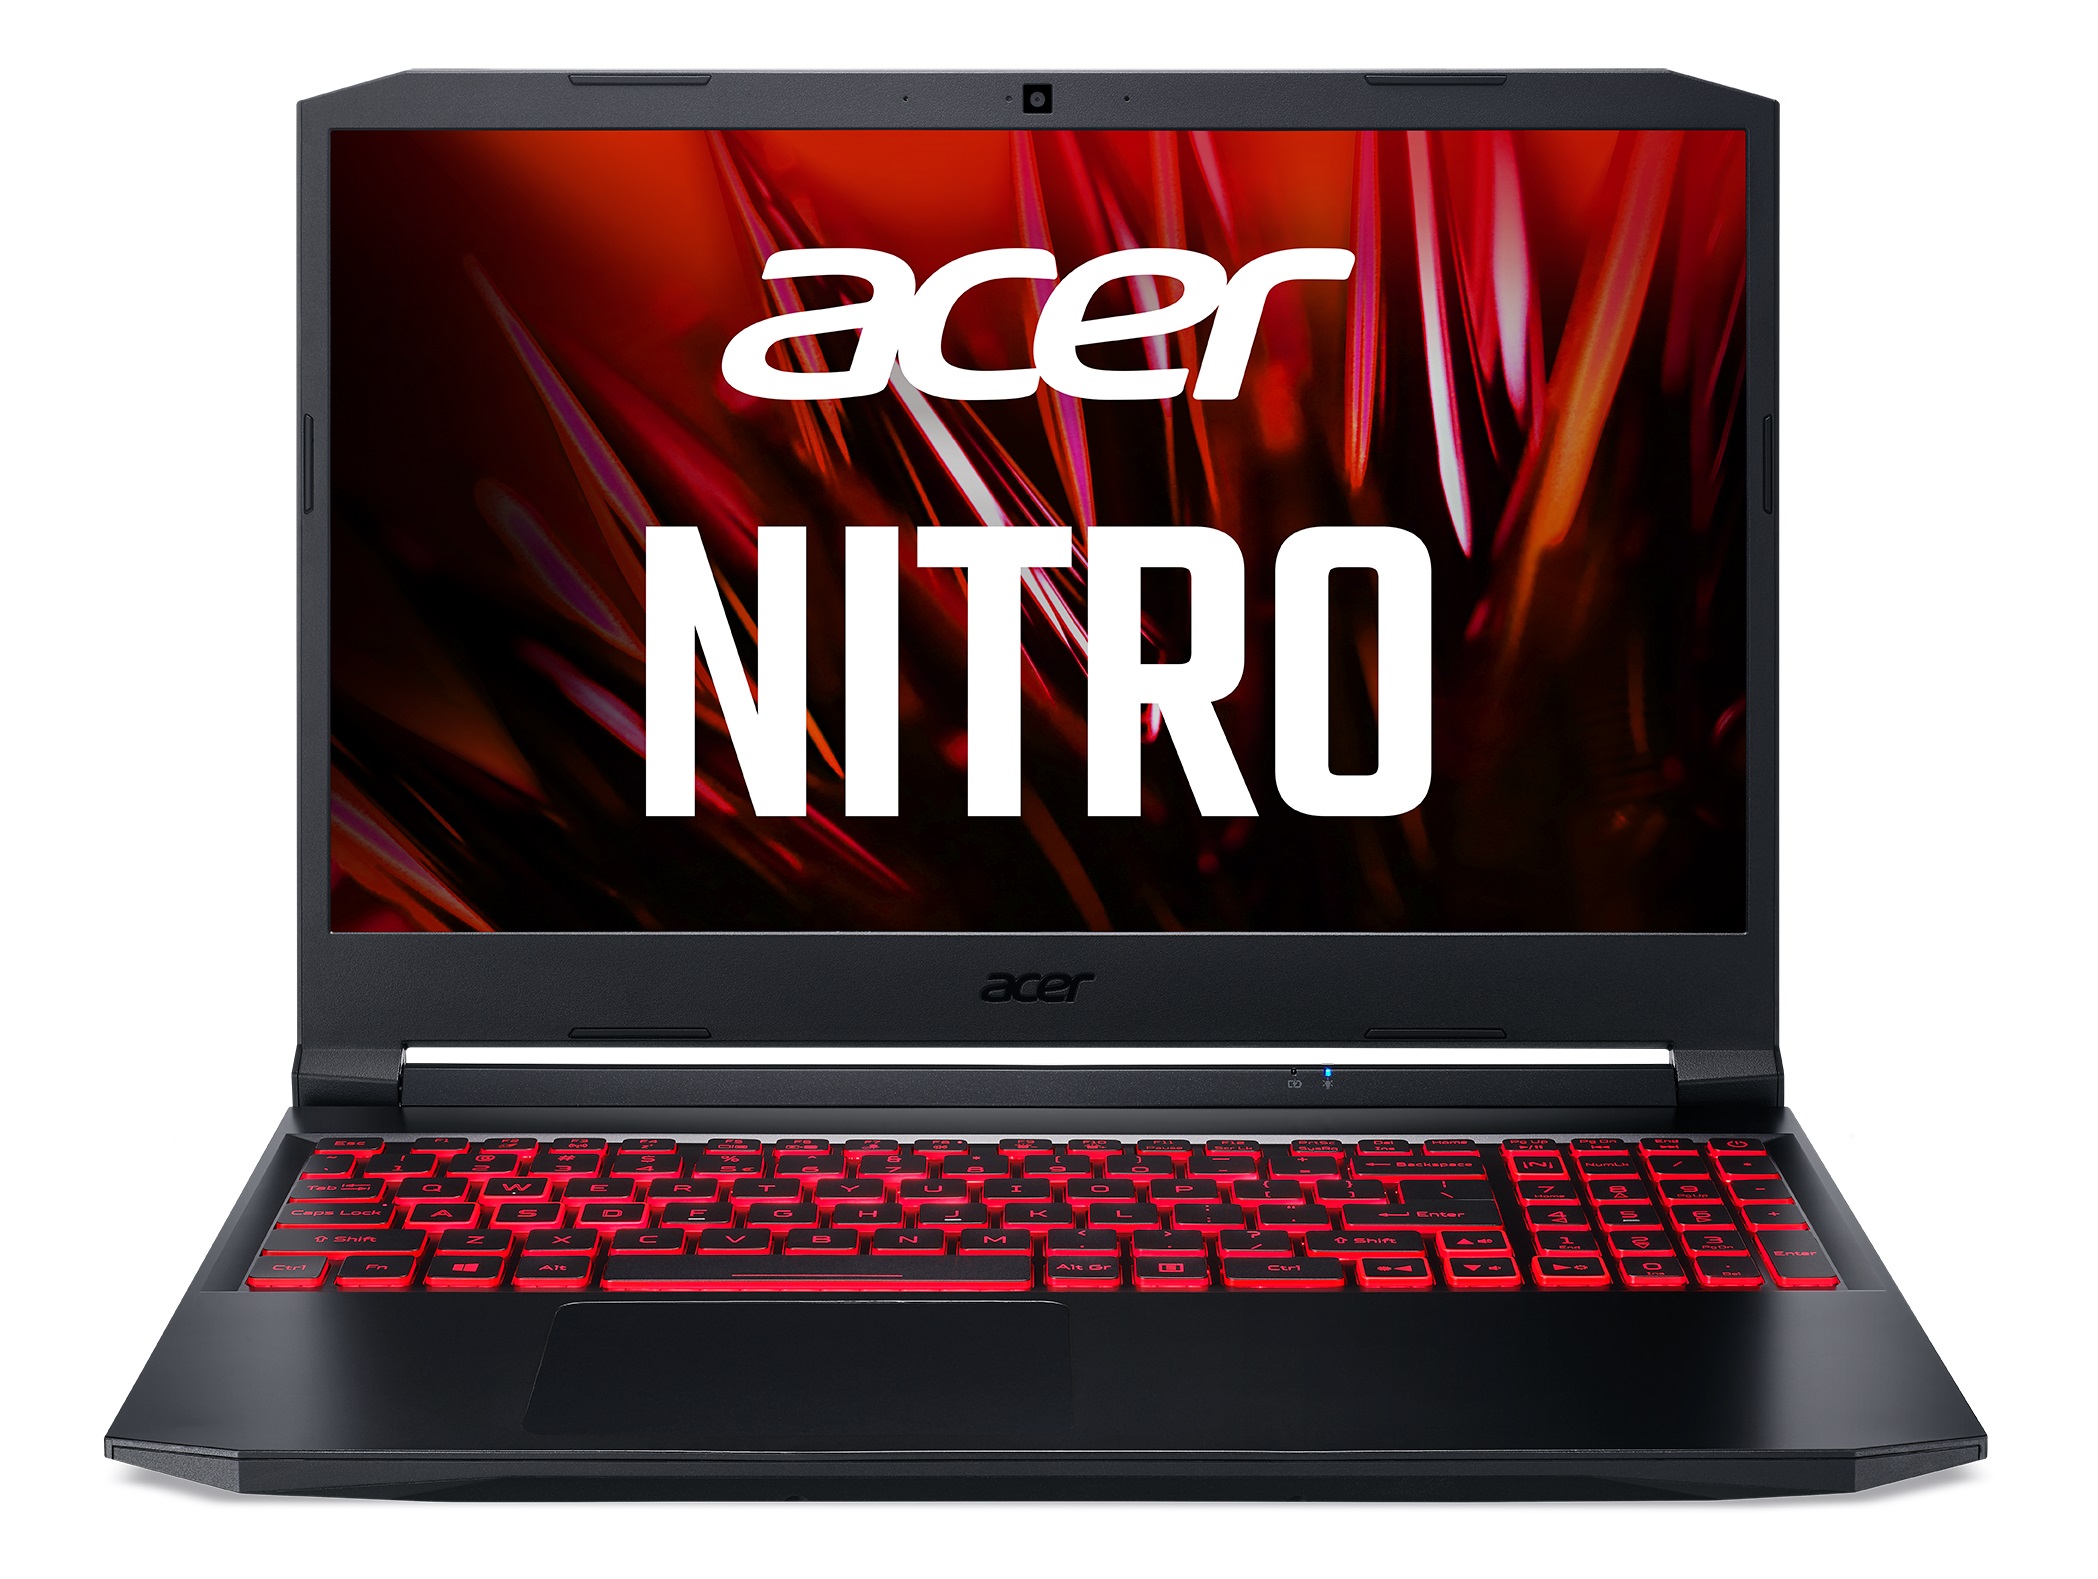 Acer Nitro 5 review: A fine laptop for a decent gaming experience